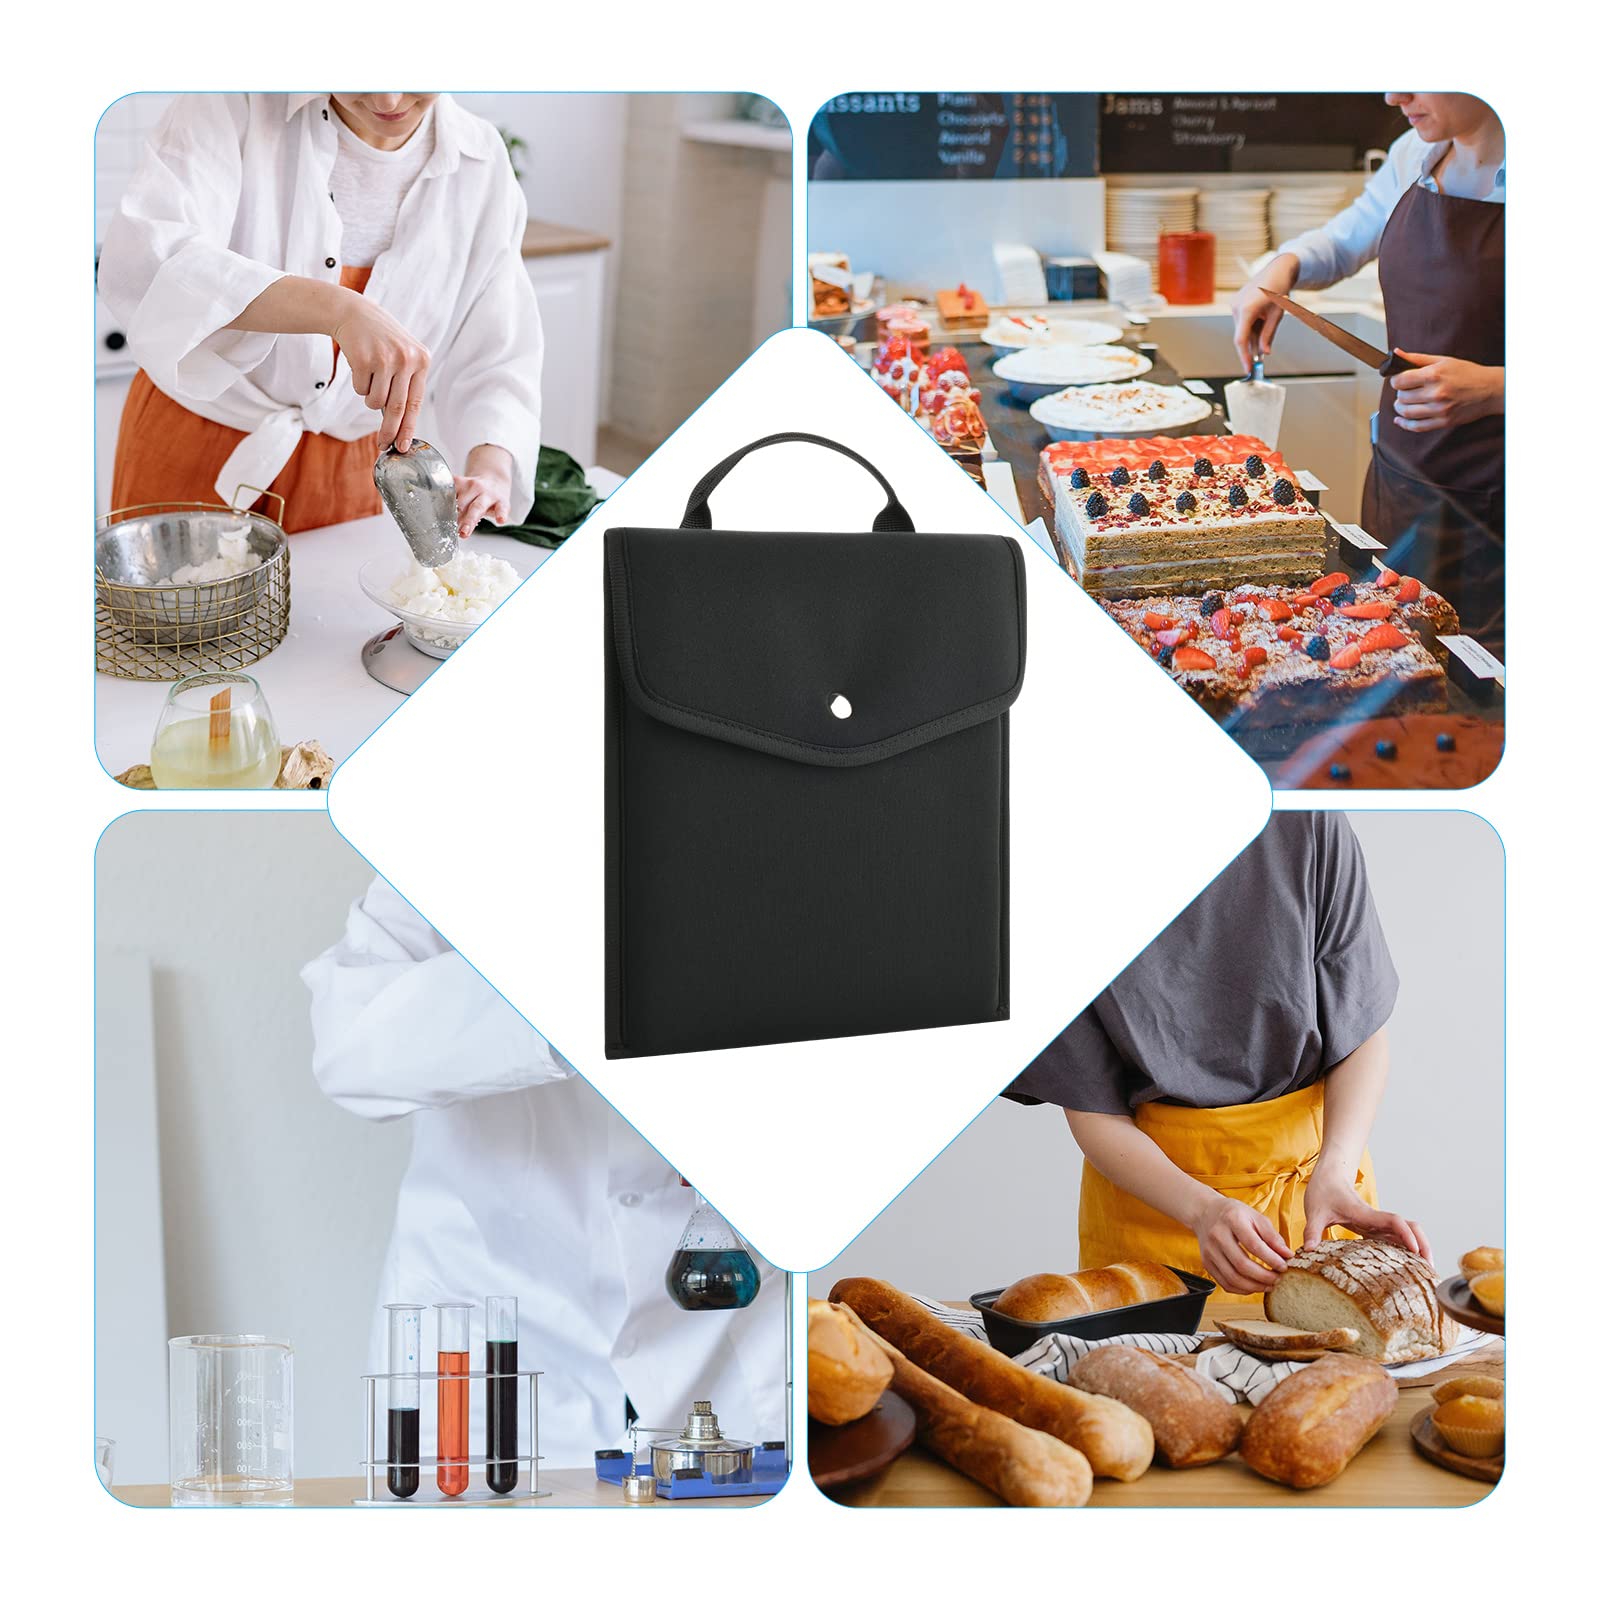 Beautyflier Carrying Case Compatible with Digital Food Kitchen Scale, Neoprene Dust Cover for Who Loving Baking and Cooking, Digital Not Include